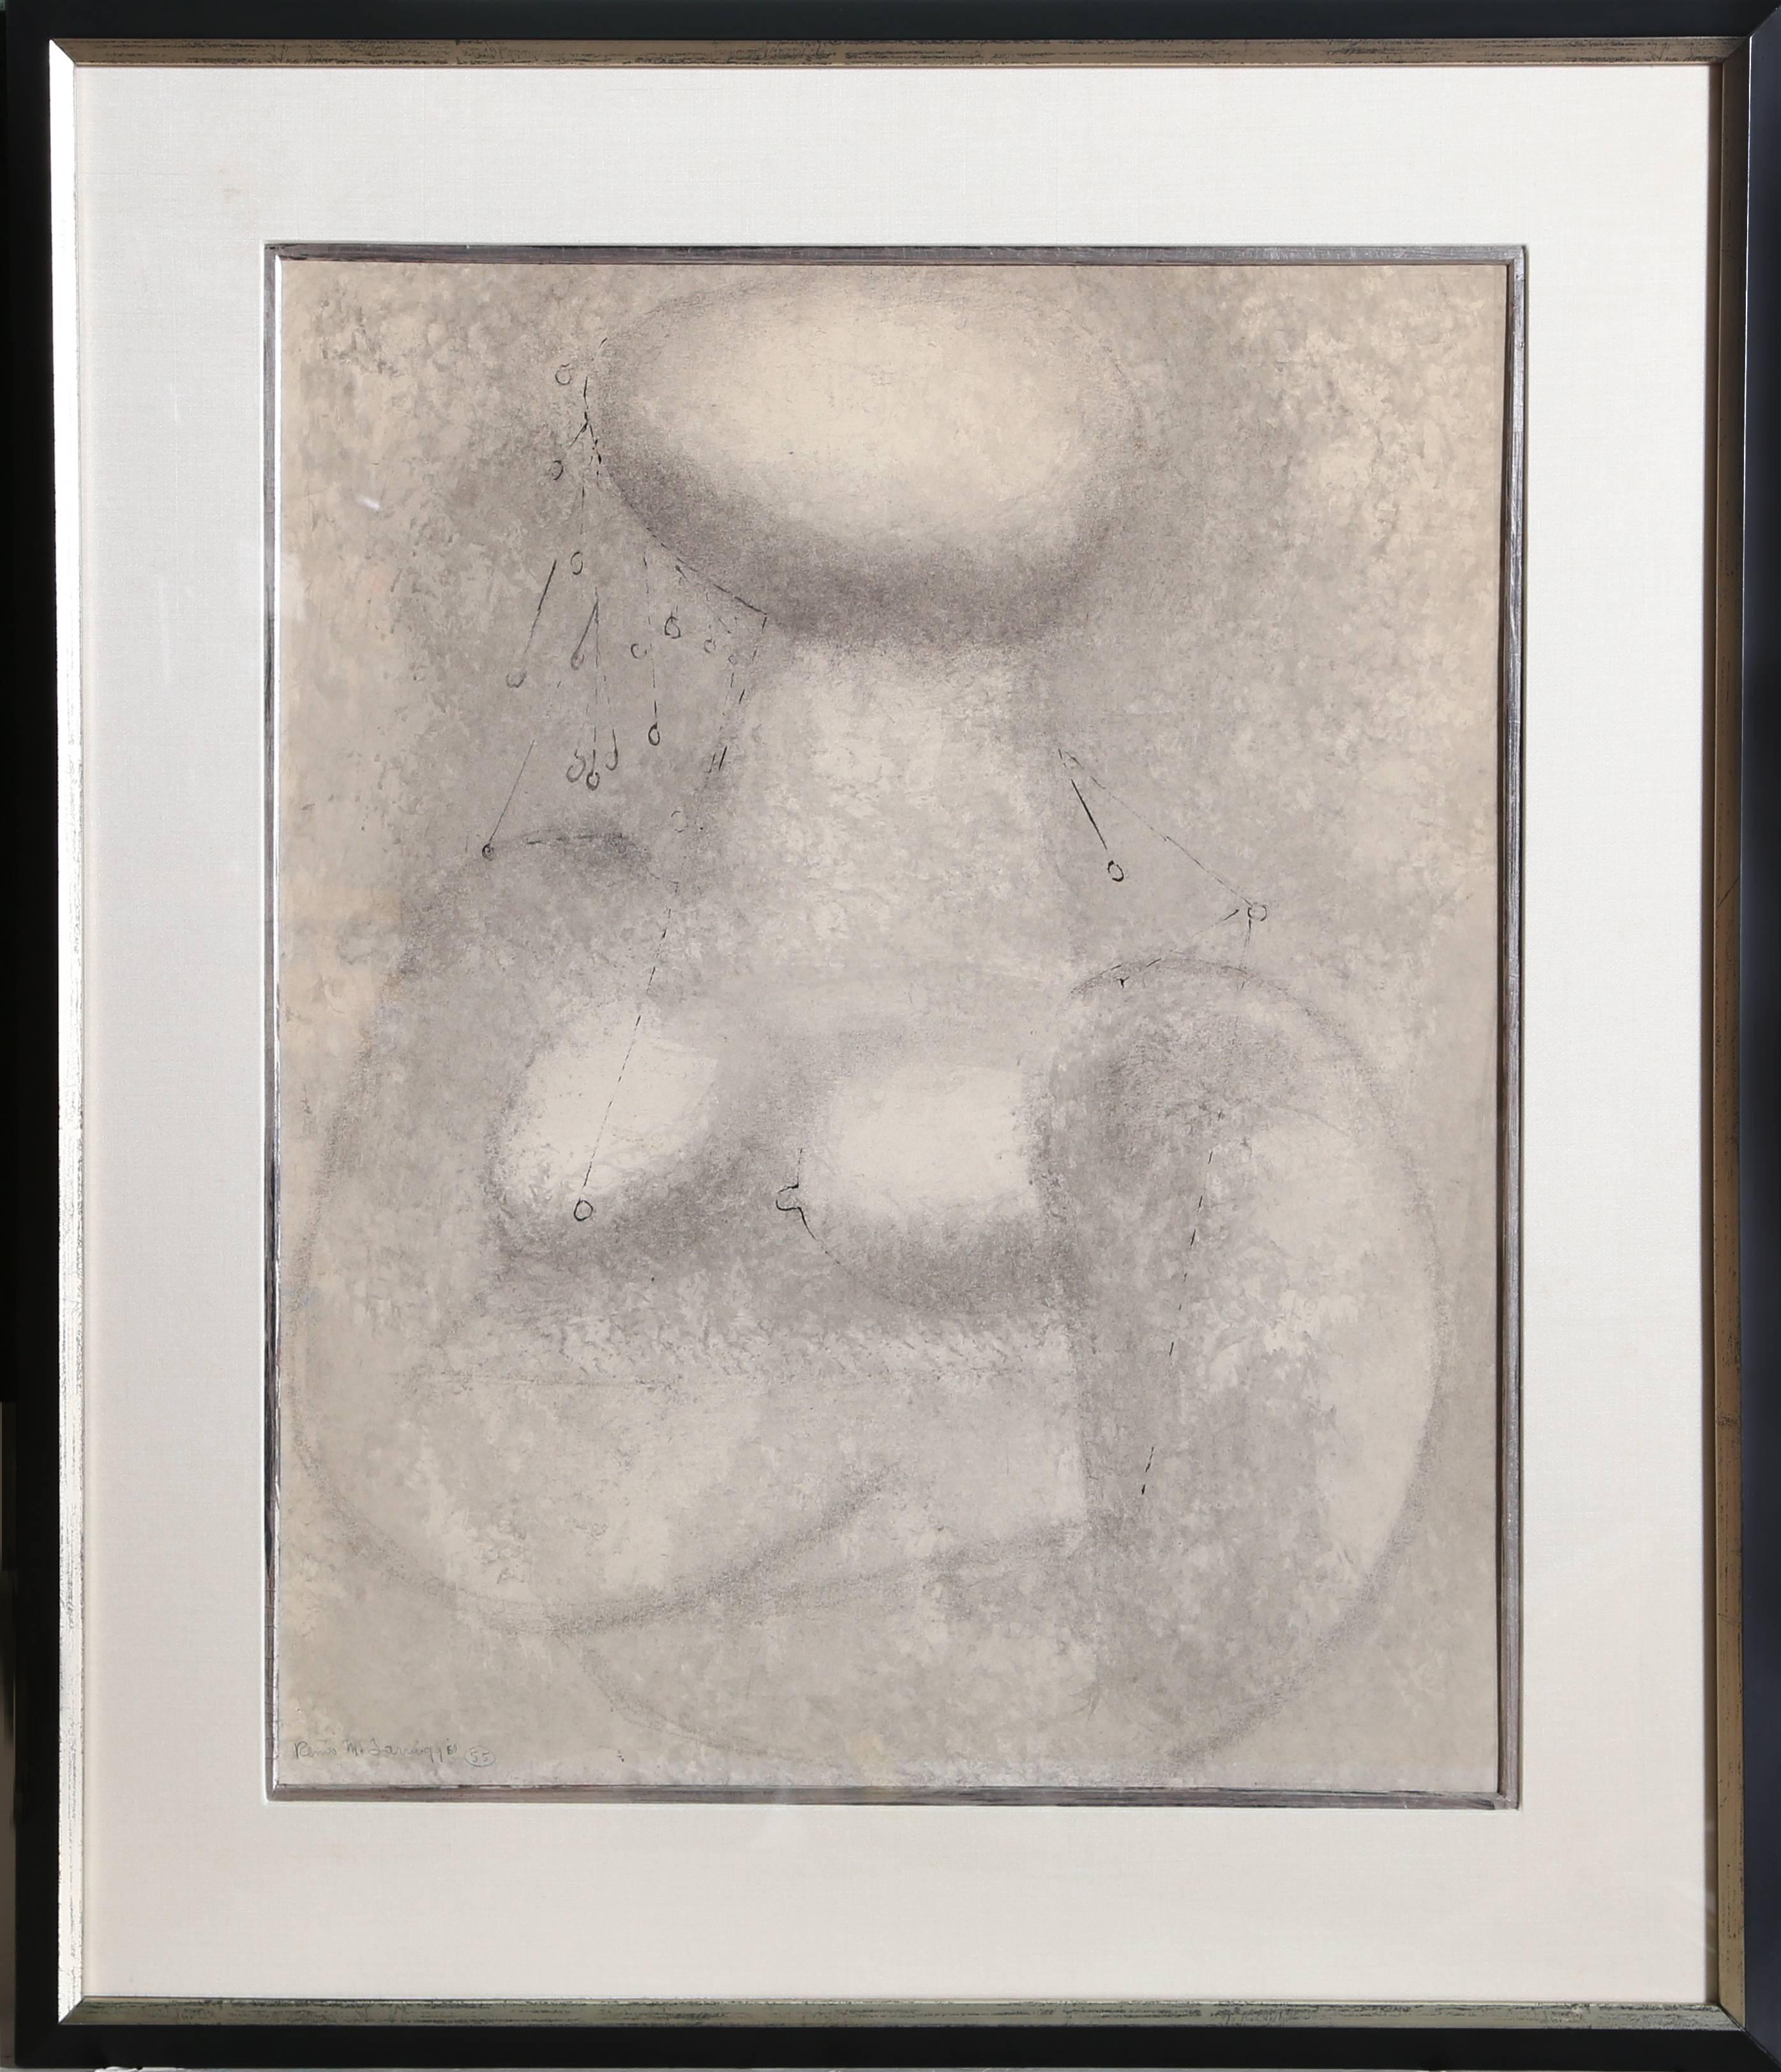 Artist: Remo Farruggio, Italian/American (1904 - 1981)
Title: Study of a Woman
Year: 1955
Medium: Graphite on Paper, signed and dated
Size: 24 in. x 18 in. (60.96 cm x 45.72 cm)
Frame Size: 32 x 27 inches